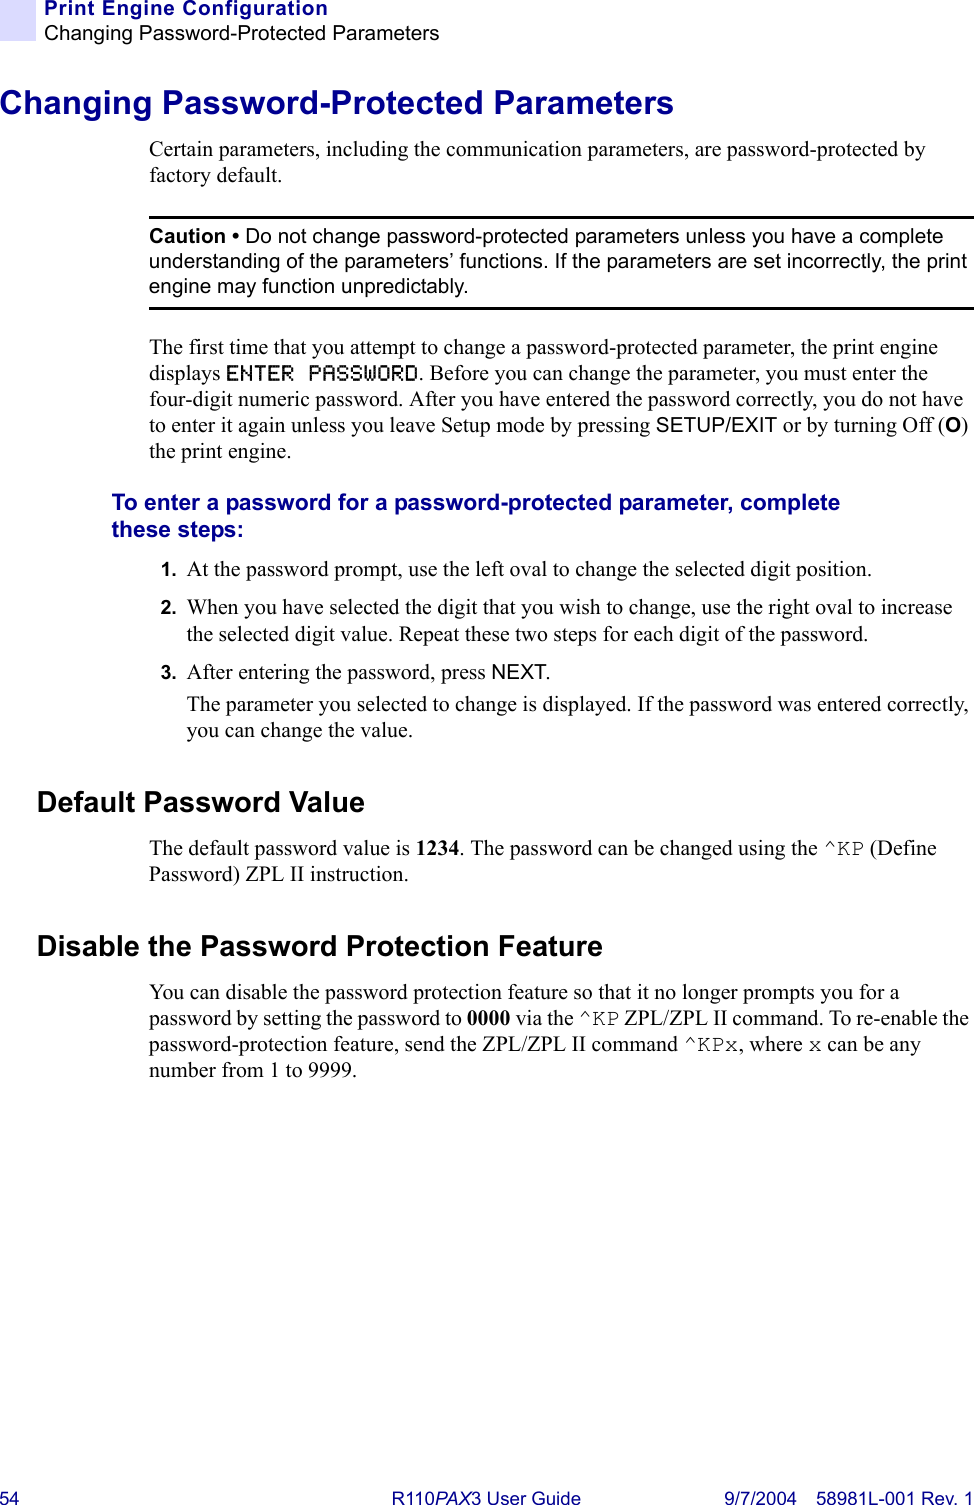 54 R110PA X3 User Guide 9/7/2004 58981L-001 Rev. 1Print Engine ConfigurationChanging Password-Protected ParametersChanging Password-Protected ParametersCertain parameters, including the communication parameters, are password-protected by factory default.The first time that you attempt to change a password-protected parameter, the print engine displays ENTER PASSWORD. Before you can change the parameter, you must enter the four-digit numeric password. After you have entered the password correctly, you do not have to enter it again unless you leave Setup mode by pressing SETUP/EXIT or by turning Off (O) the print engine.To enter a password for a password-protected parameter, complete these steps:1. At the password prompt, use the left oval to change the selected digit position.2. When you have selected the digit that you wish to change, use the right oval to increase the selected digit value. Repeat these two steps for each digit of the password.3. After entering the password, press NEXT.The parameter you selected to change is displayed. If the password was entered correctly, you can change the value.Default Password ValueThe default password value is 1234. The password can be changed using the ^KP (Define Password) ZPL II instruction.Disable the Password Protection FeatureYou can disable the password protection feature so that it no longer prompts you for a password by setting the password to 0000 via the ^KP ZPL/ZPL II command. To re-enable the password-protection feature, send the ZPL/ZPL II command ^KPx, where x can be any number from 1 to 9999.Caution • Do not change password-protected parameters unless you have a complete understanding of the parameters’ functions. If the parameters are set incorrectly, the print engine may function unpredictably.